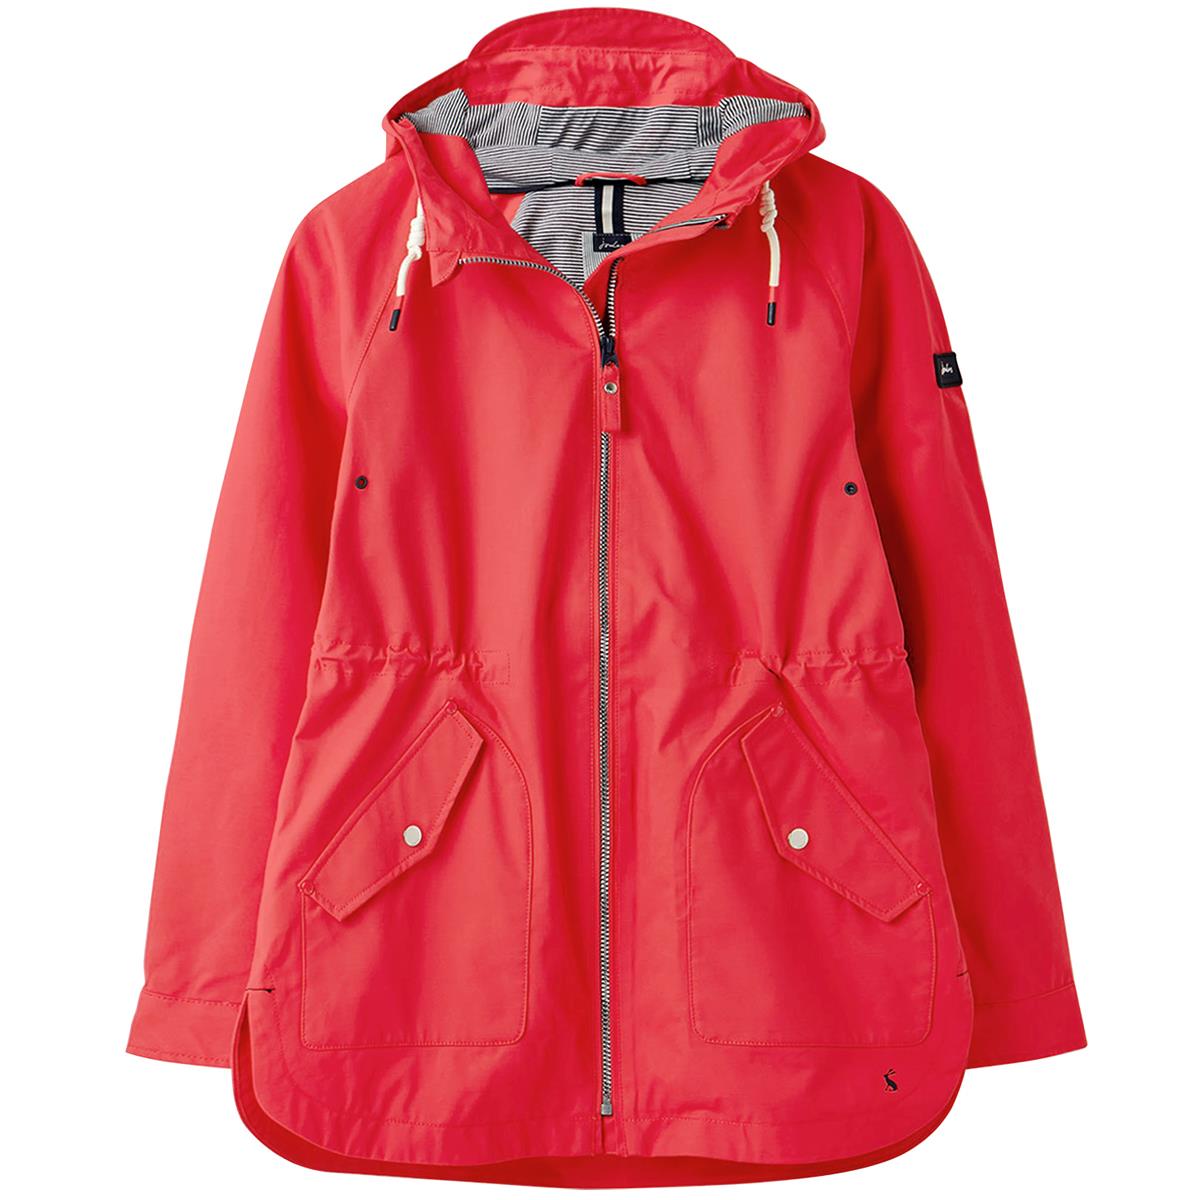 What is the cleaning process for the Joules Shoreside Coastal Waterproof Jacket?